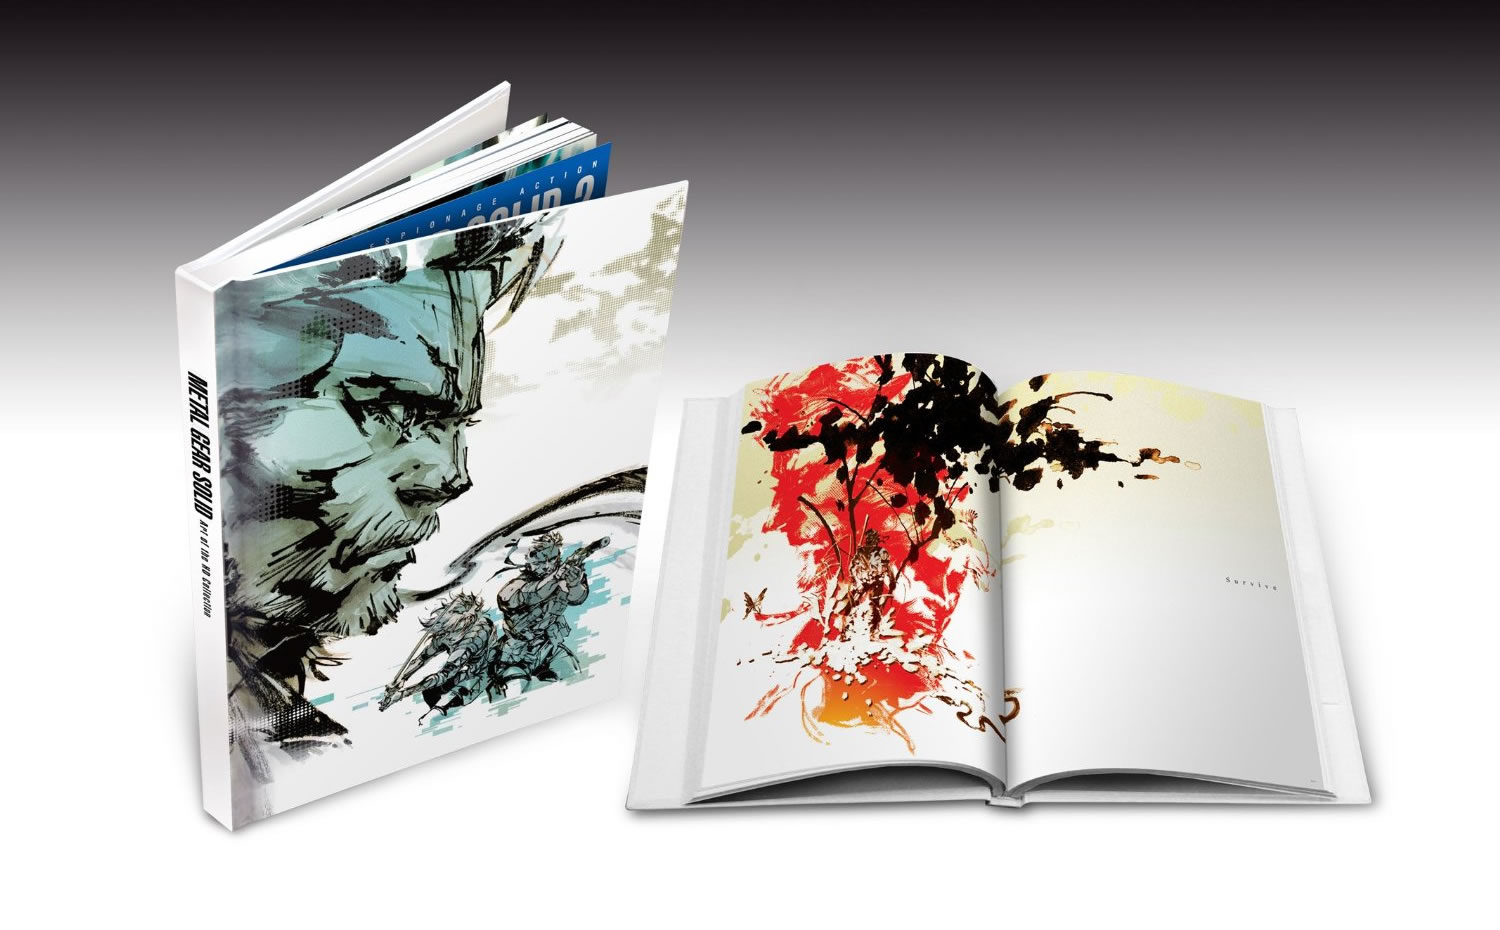 Metal Gear Solid HD Collection Limited Edition